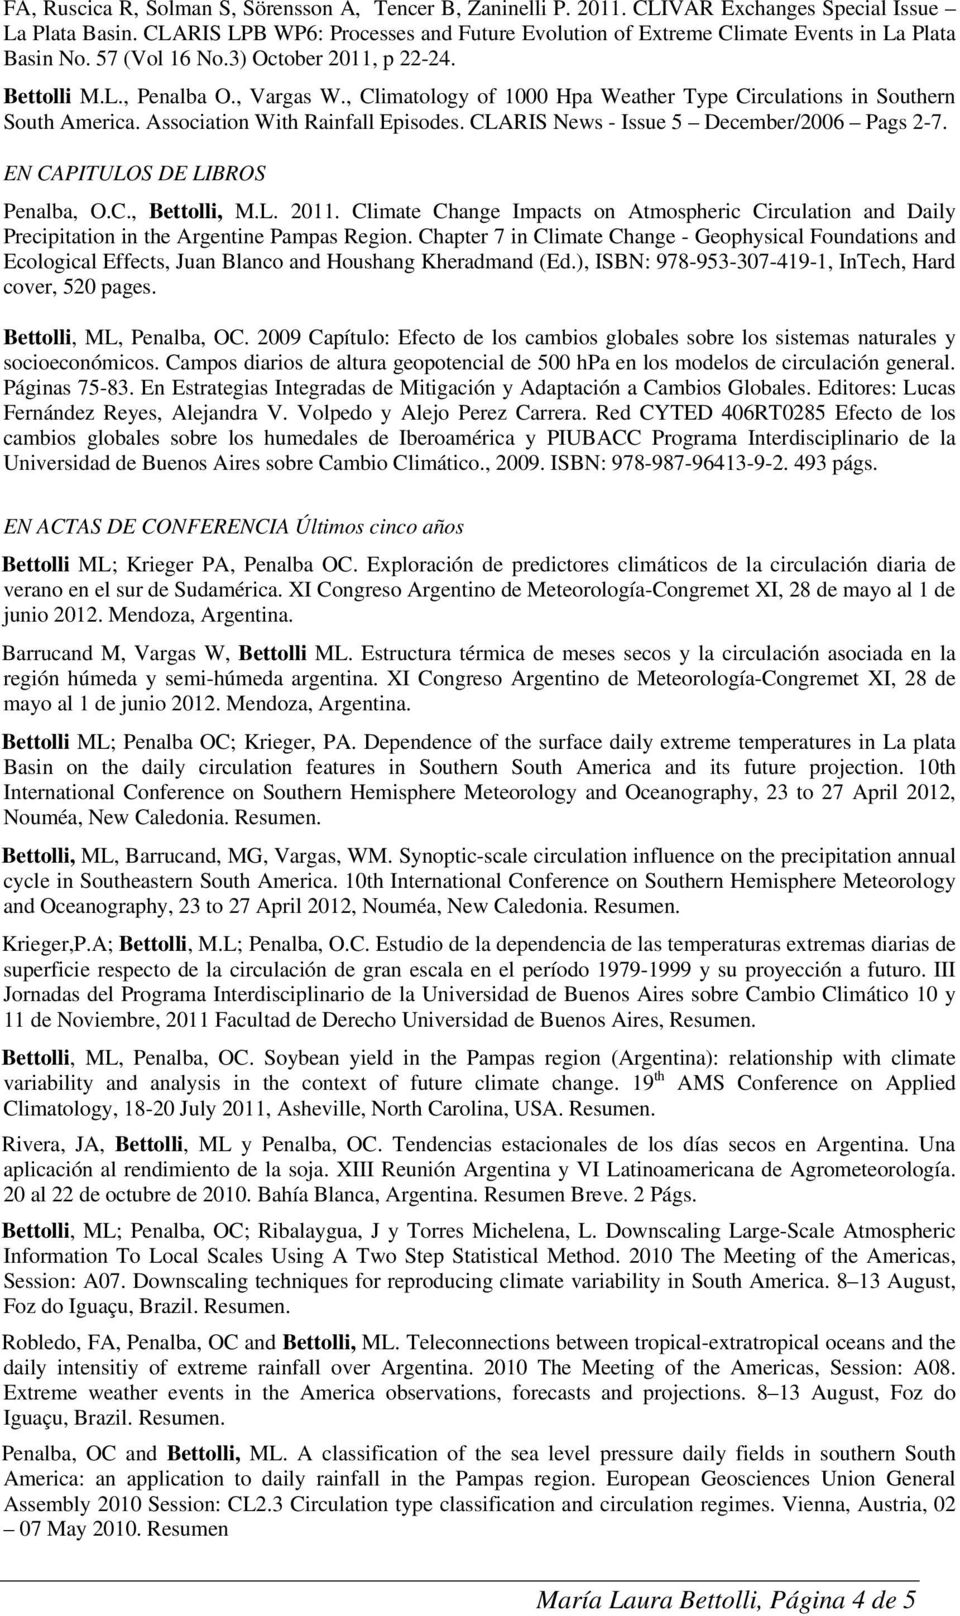 , Climatology of 1000 Hpa Weather Type Circulations in Southern South America. Association With Rainfall Episodes. CLARIS News - Issue 5 December/2006 Pags 2-7. EN CAPITULOS DE LIBROS Penalba, O.C., Bettolli, M.